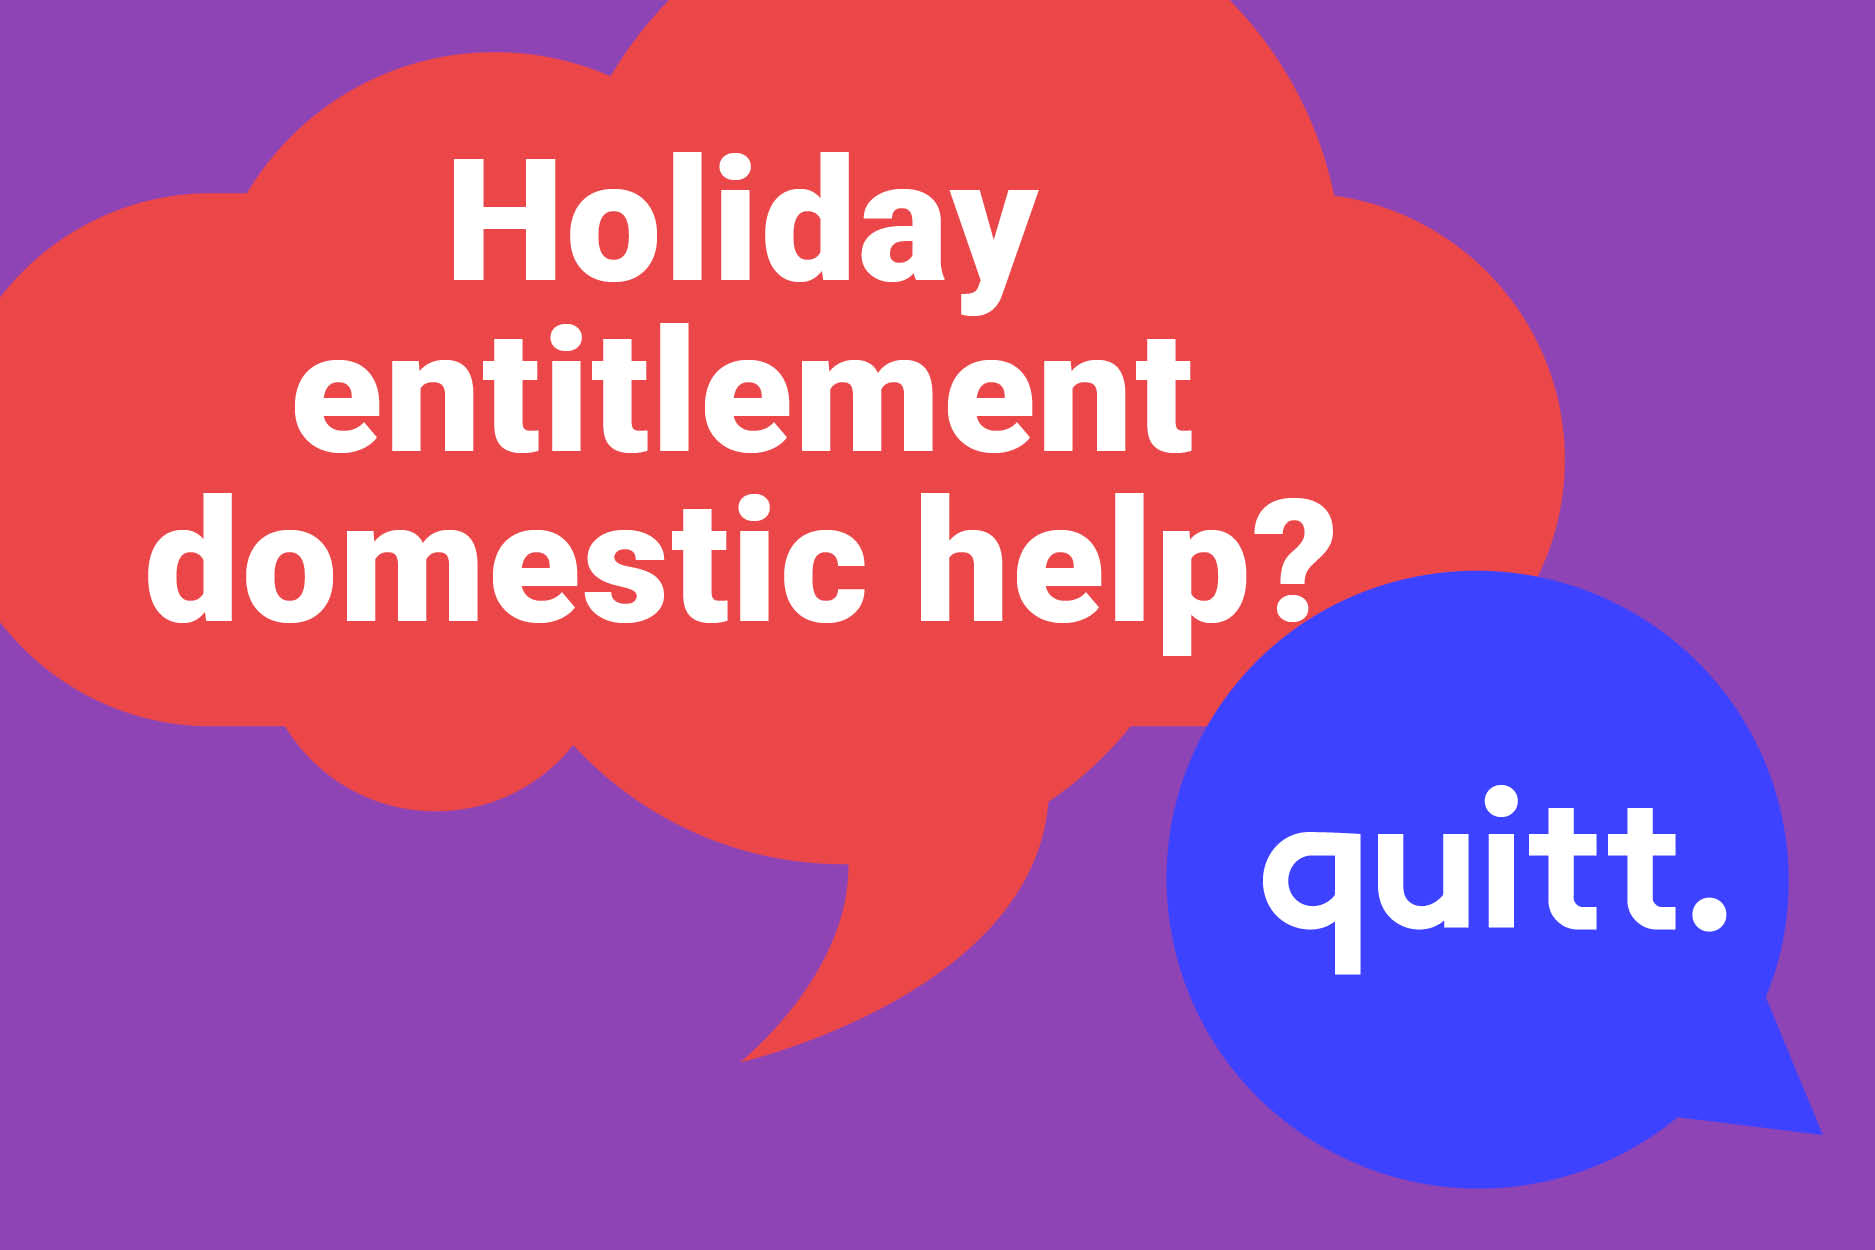 How many weeks of holiday entitlement does my domestic helper have?